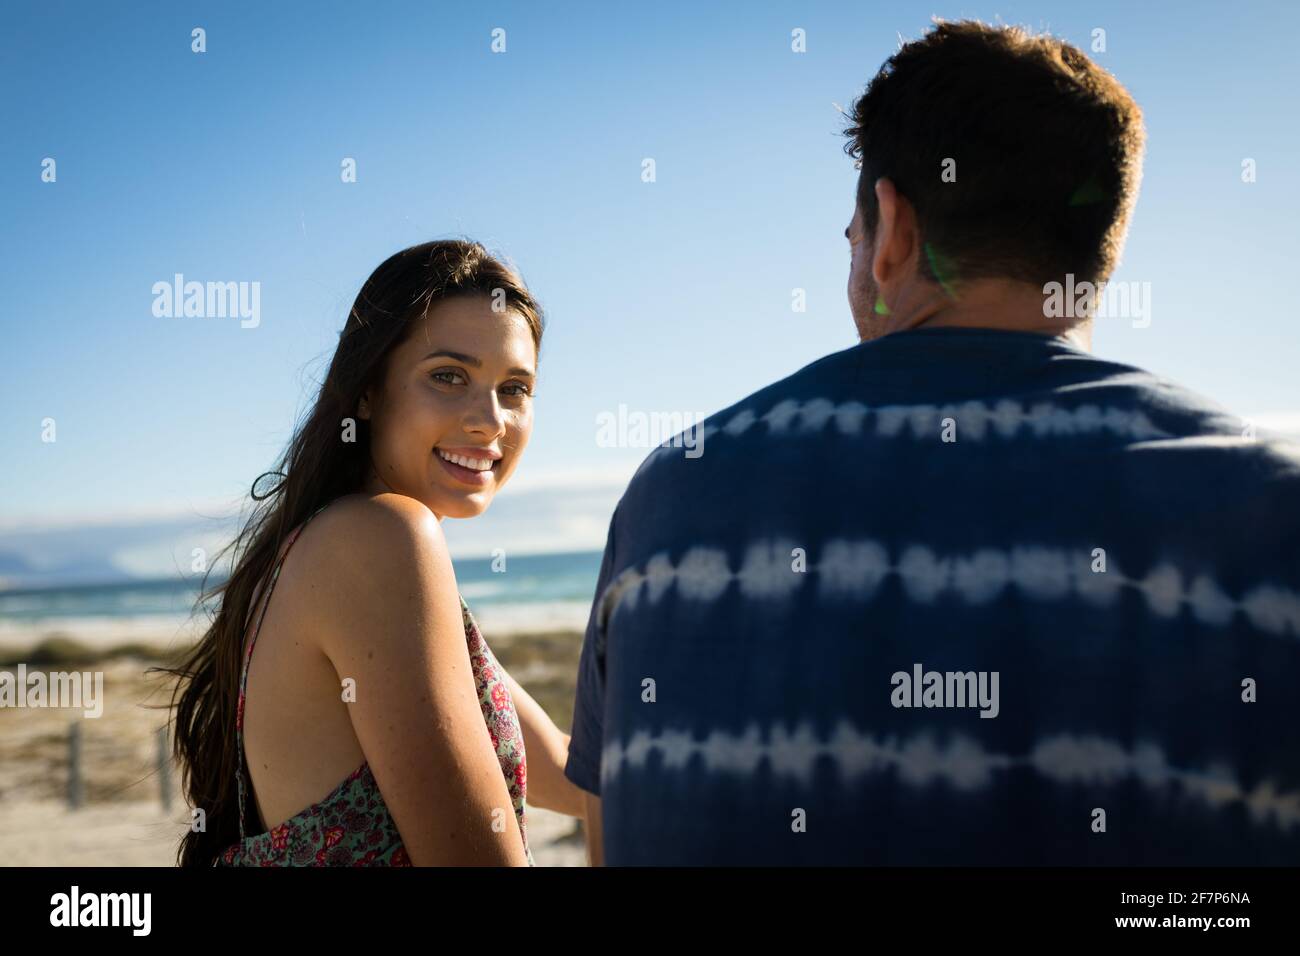 Portrait of caucasian couple on beach, woman looking to camera, smiling Stock Photo